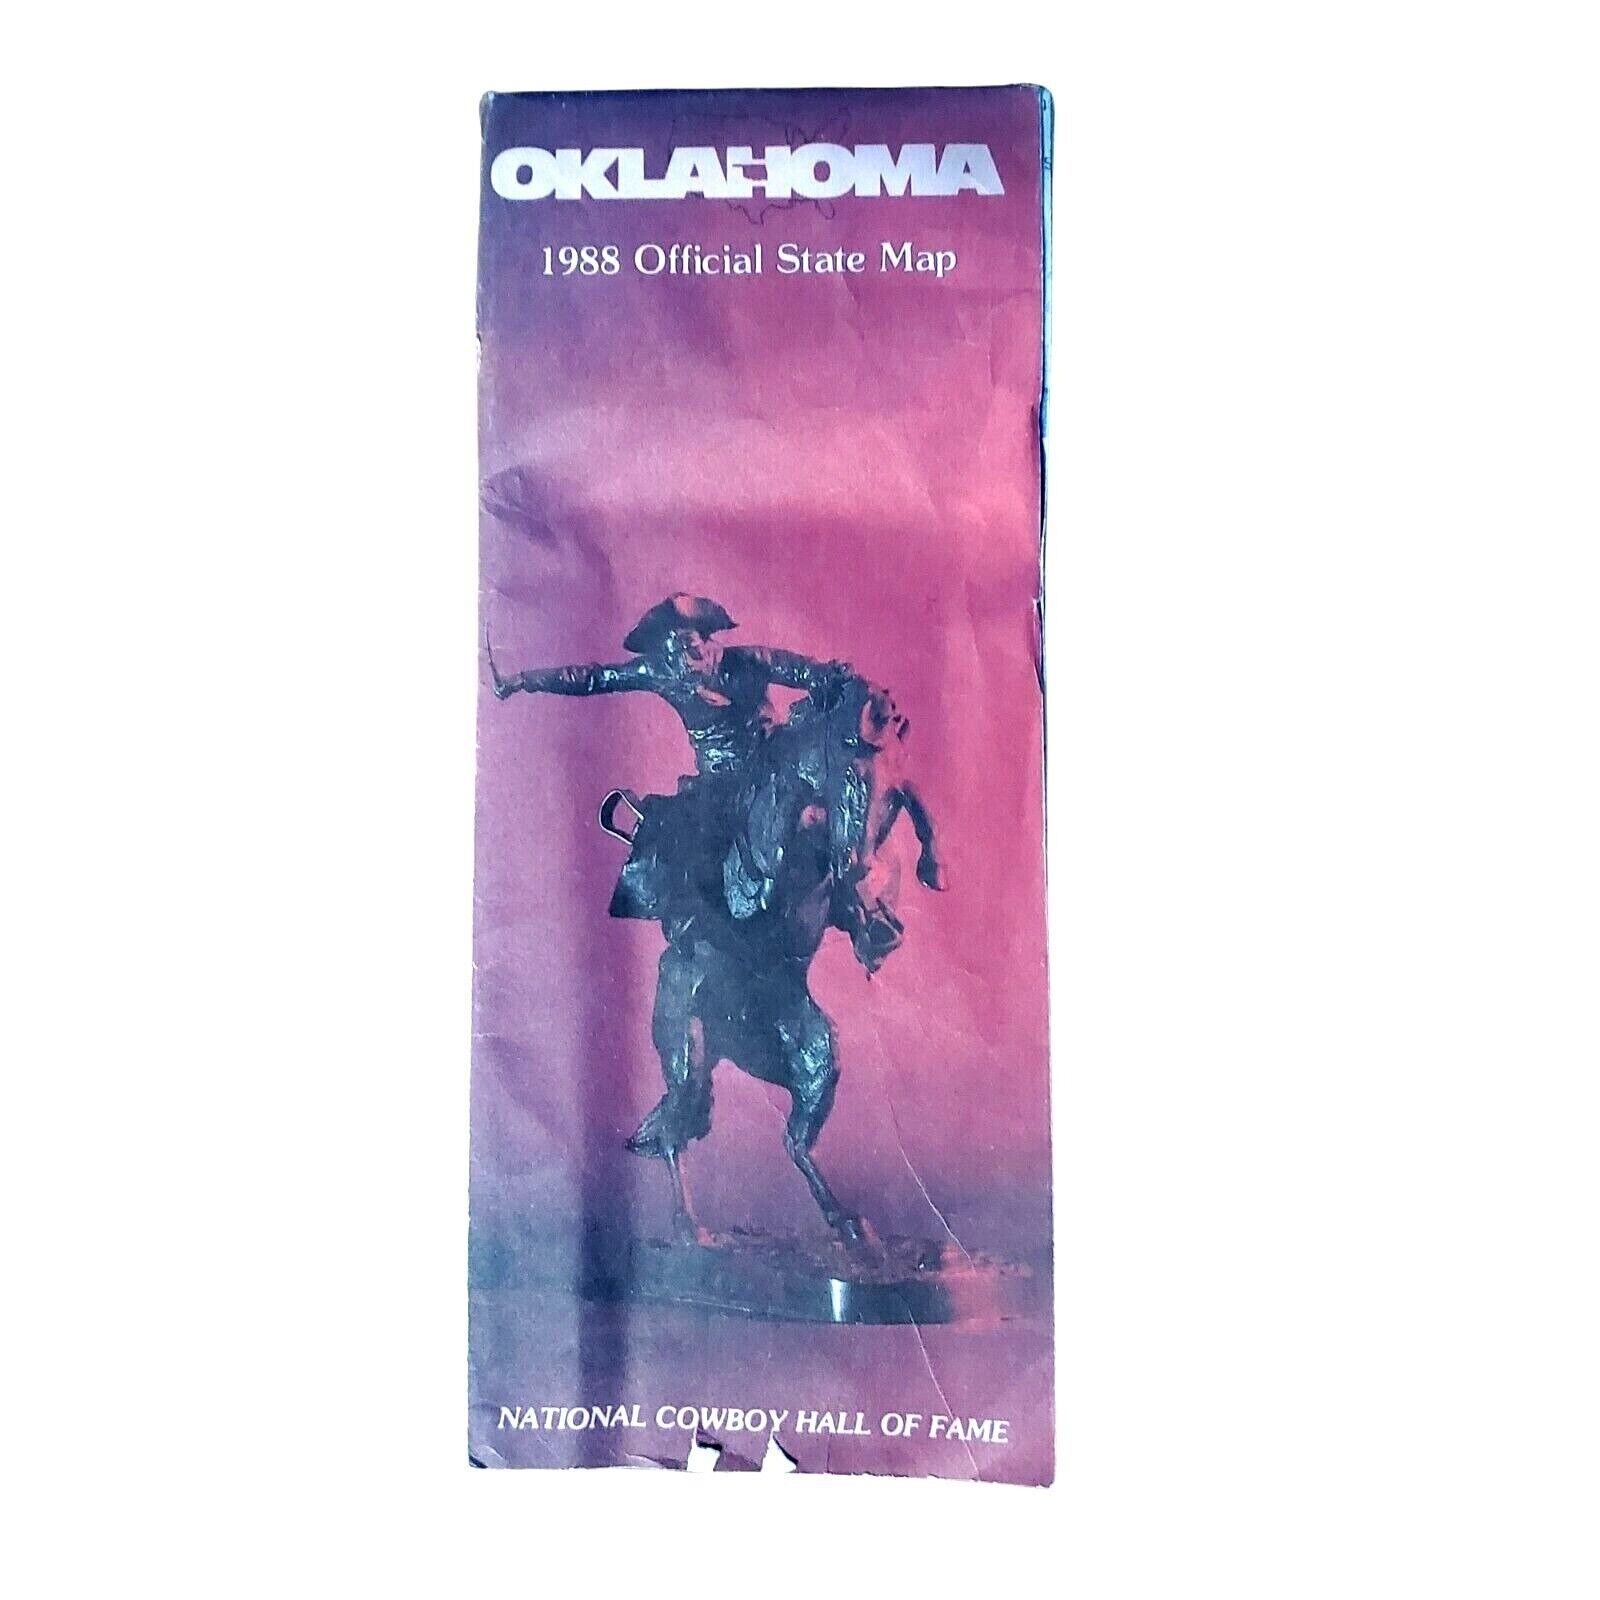 Official 1988 Oklahoma State Highway Travel Road Map